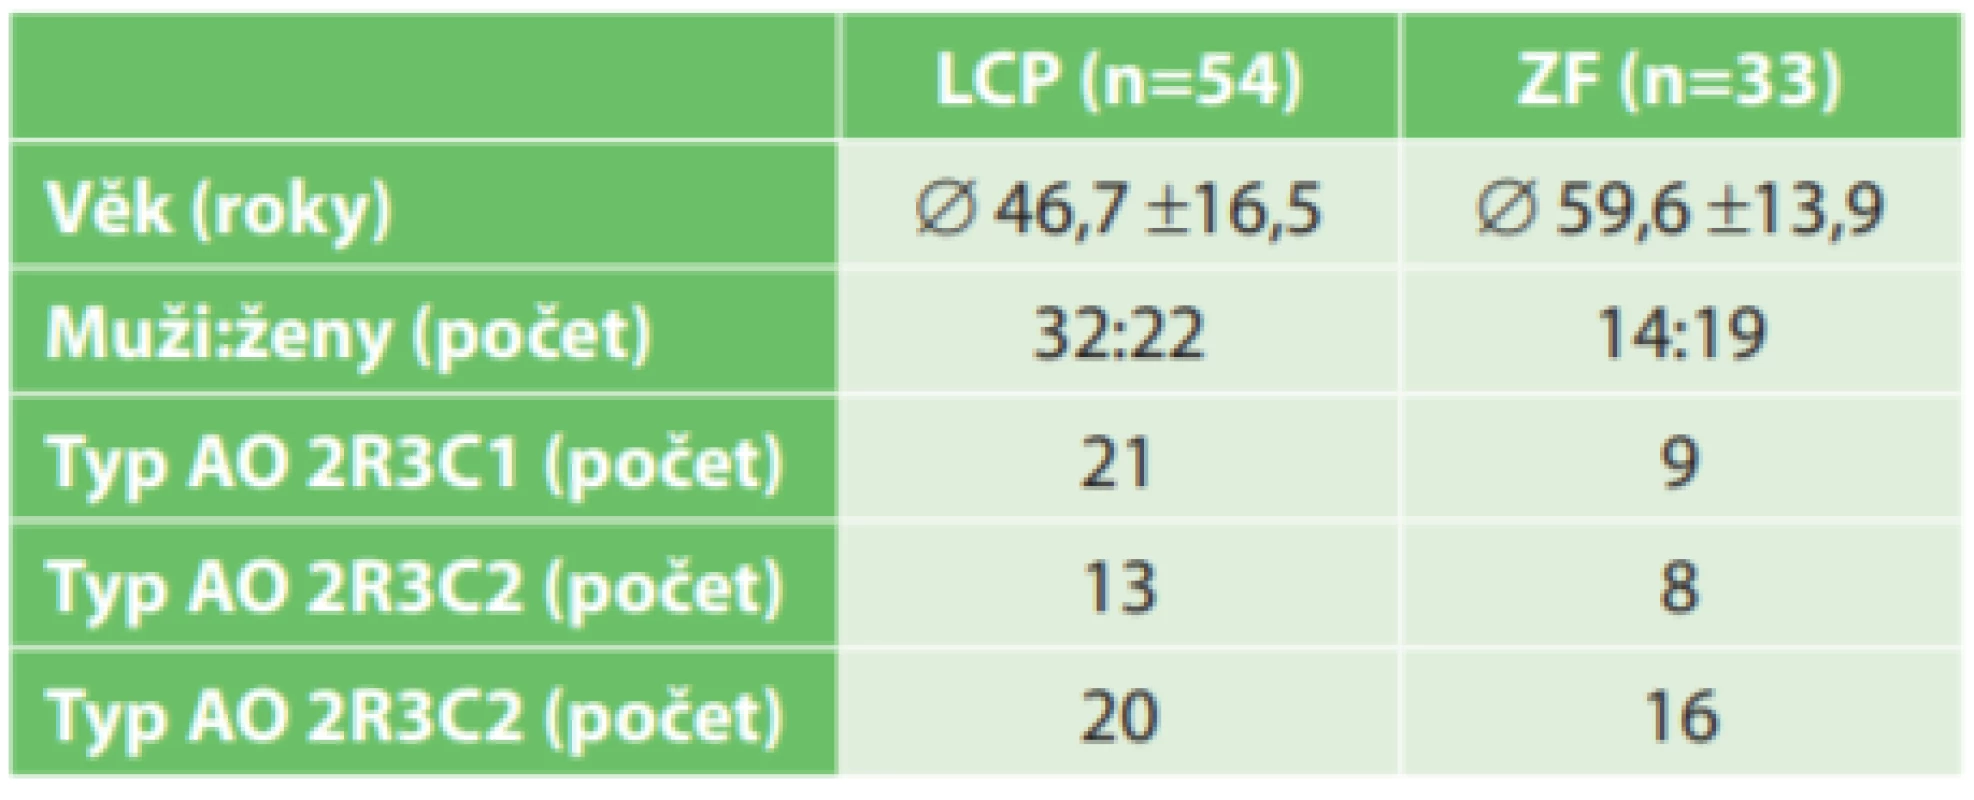 Popis skupin pacientů LCP a ZF<br>
Tab. 1: Description of LCP and EF patient groups